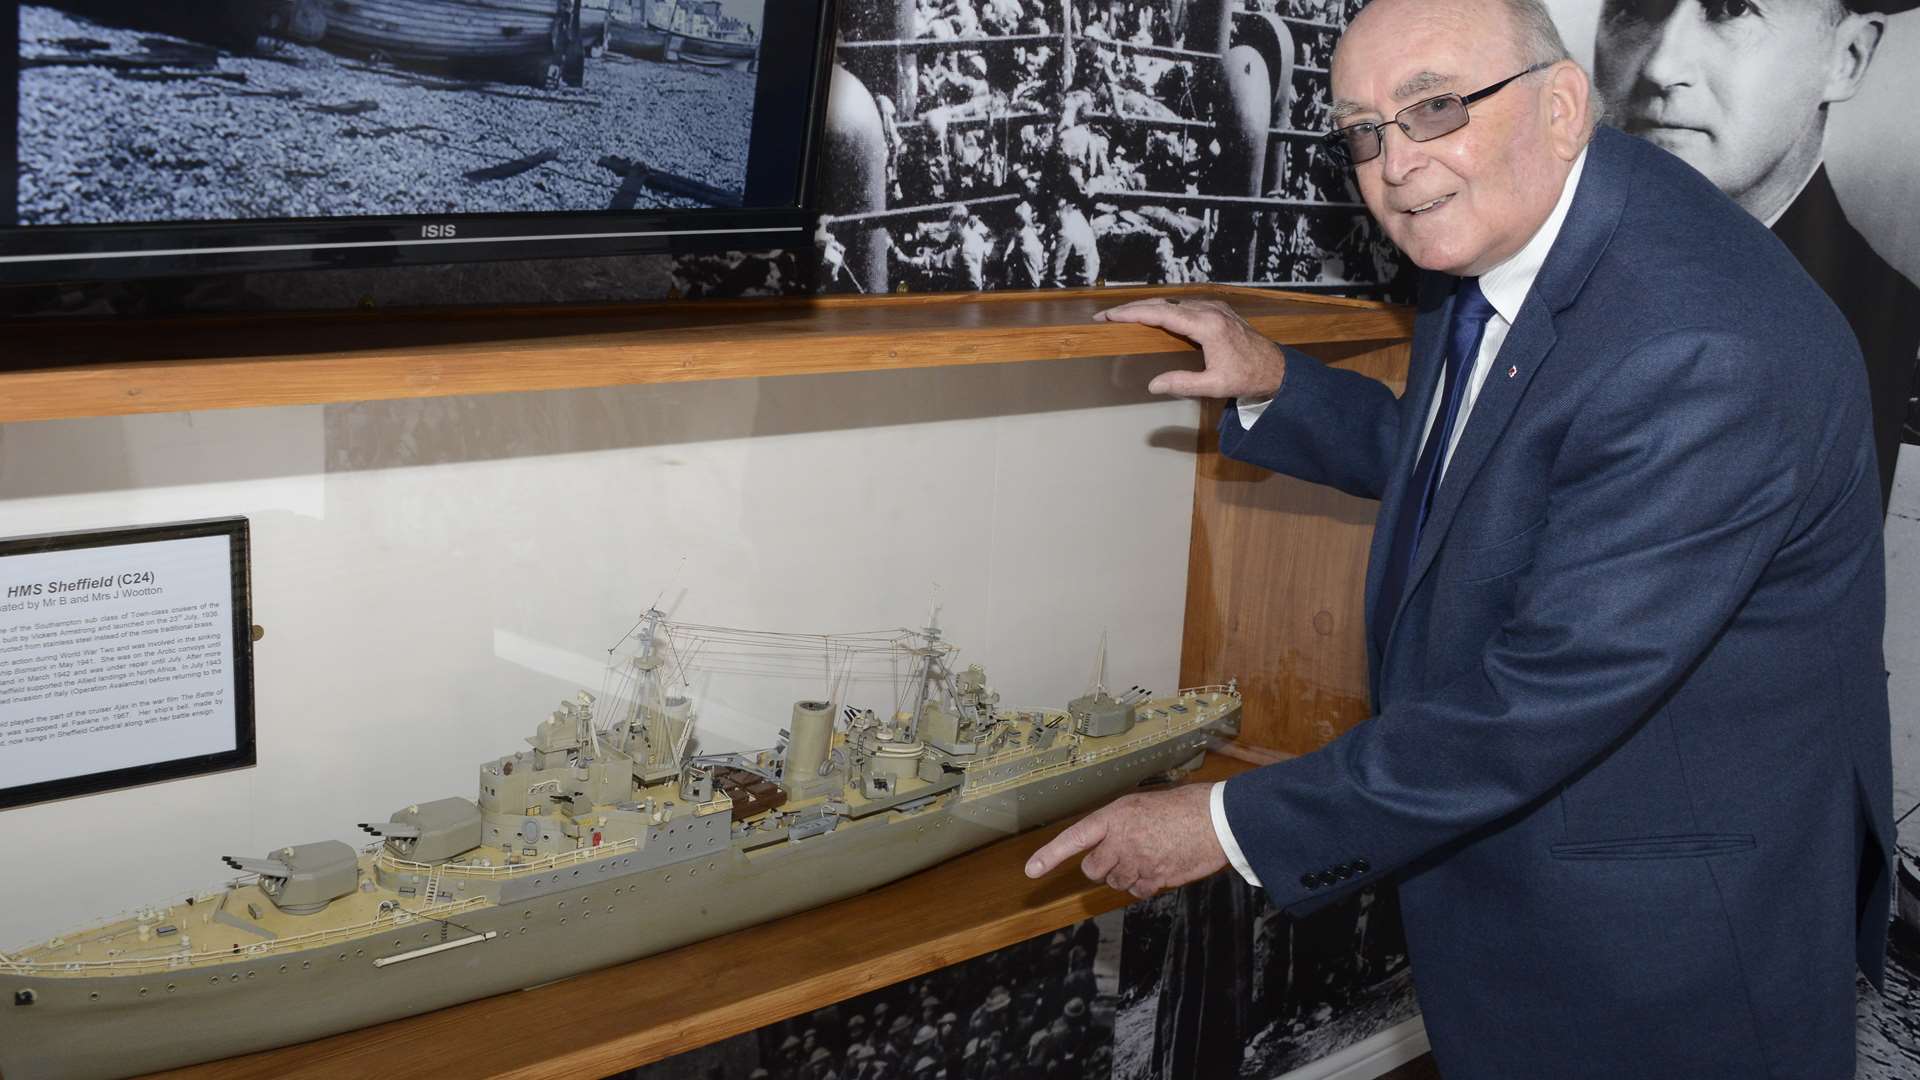 Barry Wootton donated the model of HMS Sheffield